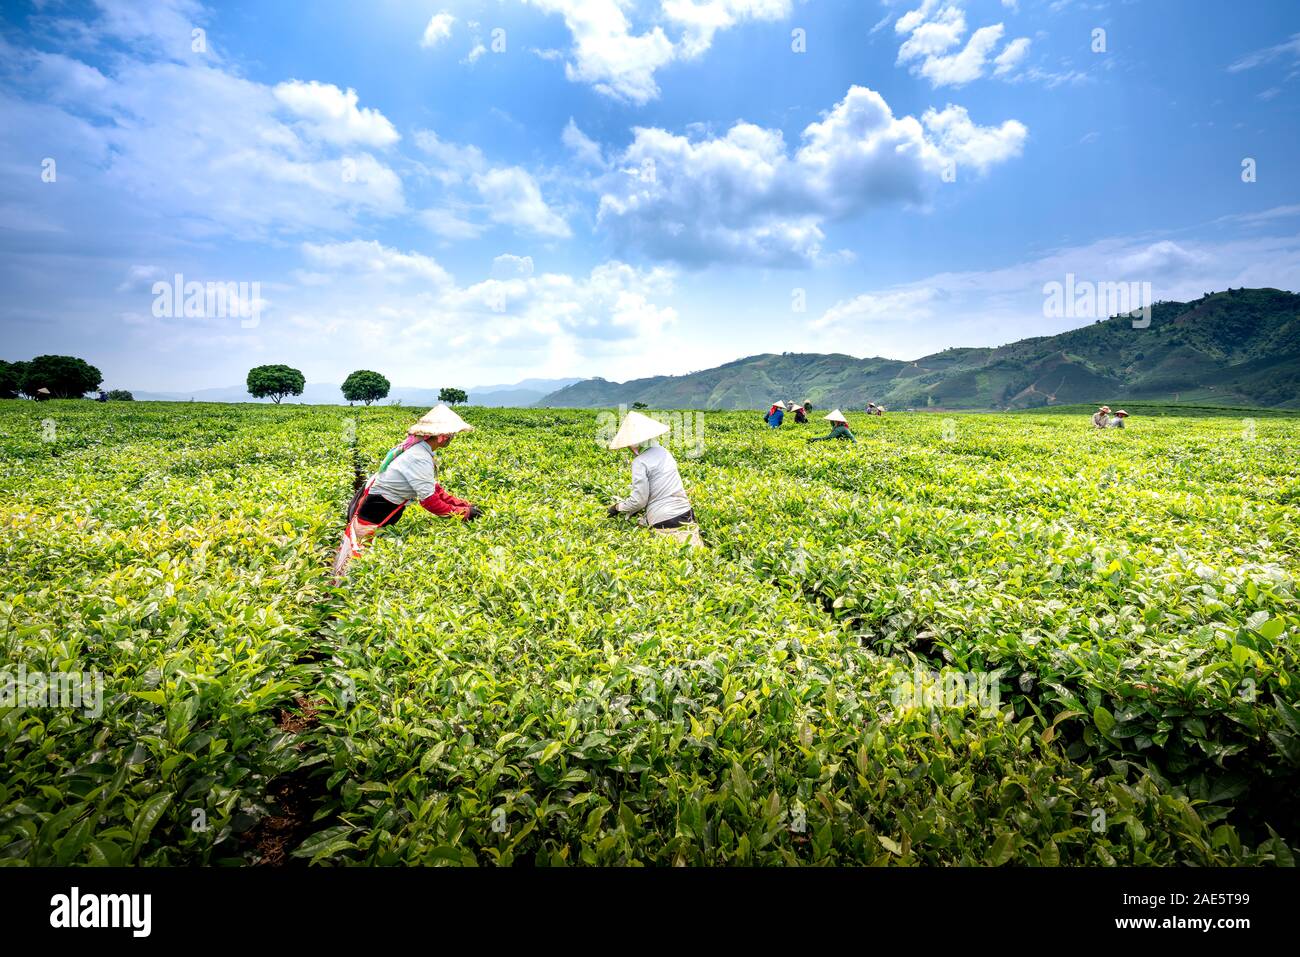 Tea plantation farm, Lai Chau province, Vietnam - September 20, 2019: images of female workers harvesting green tea in the early sunshine with blue sk Stock Photo